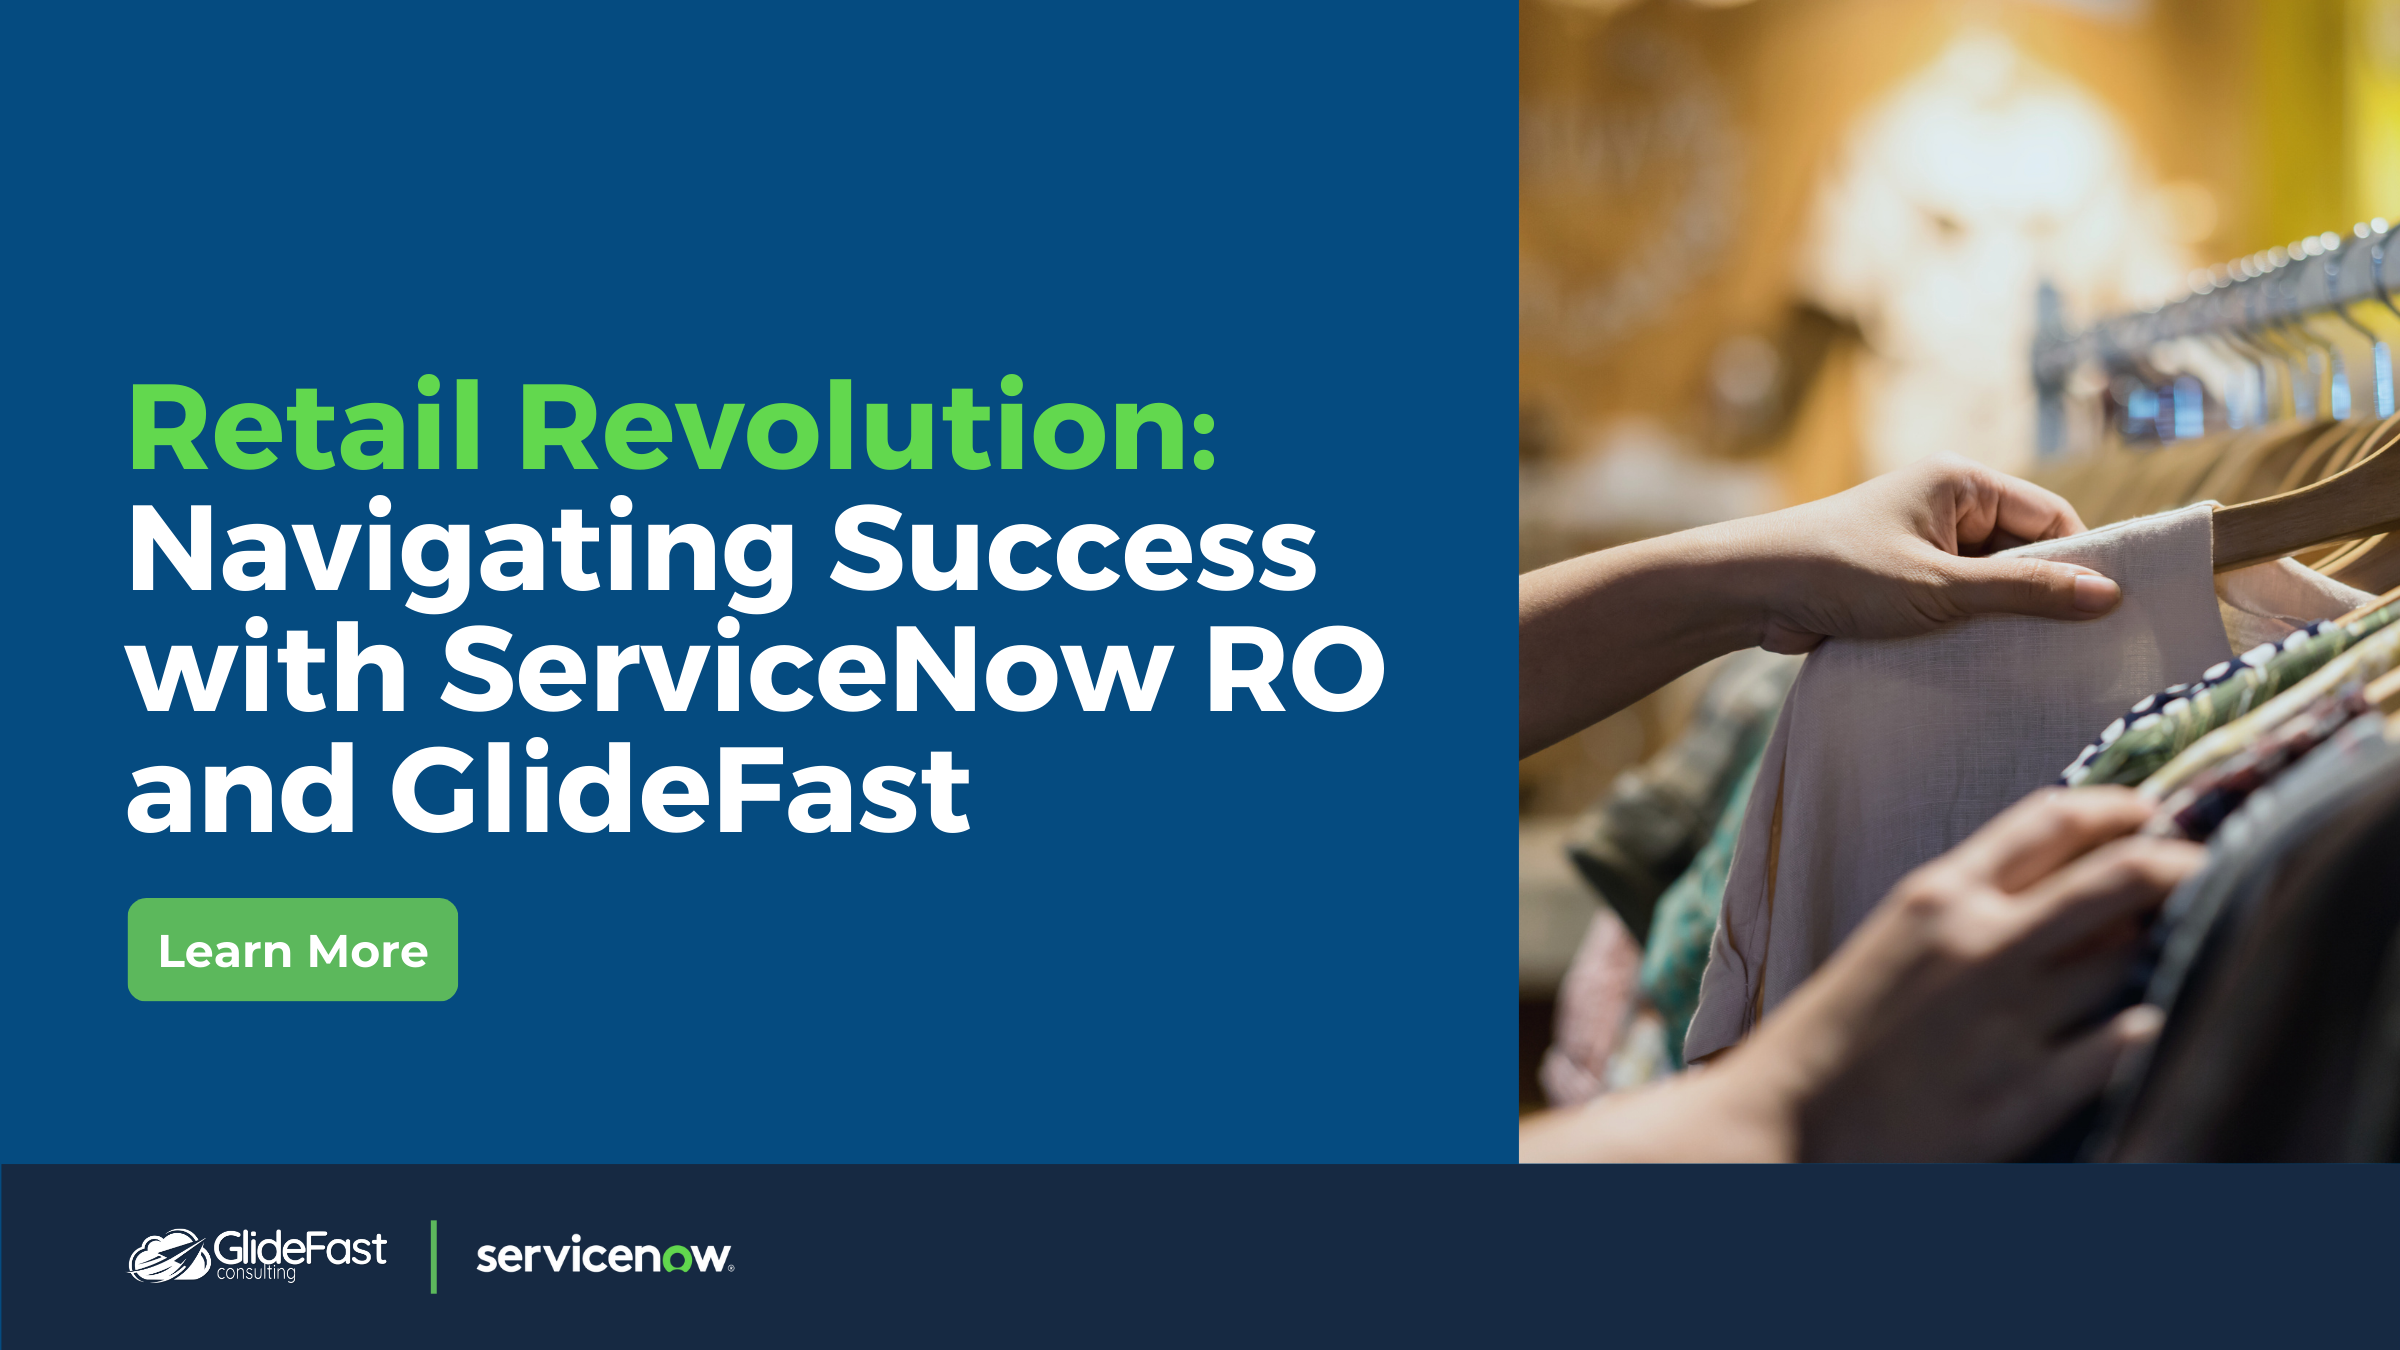 Retail Revolution: Navigating Success with ServiceNow RO and GlideFast